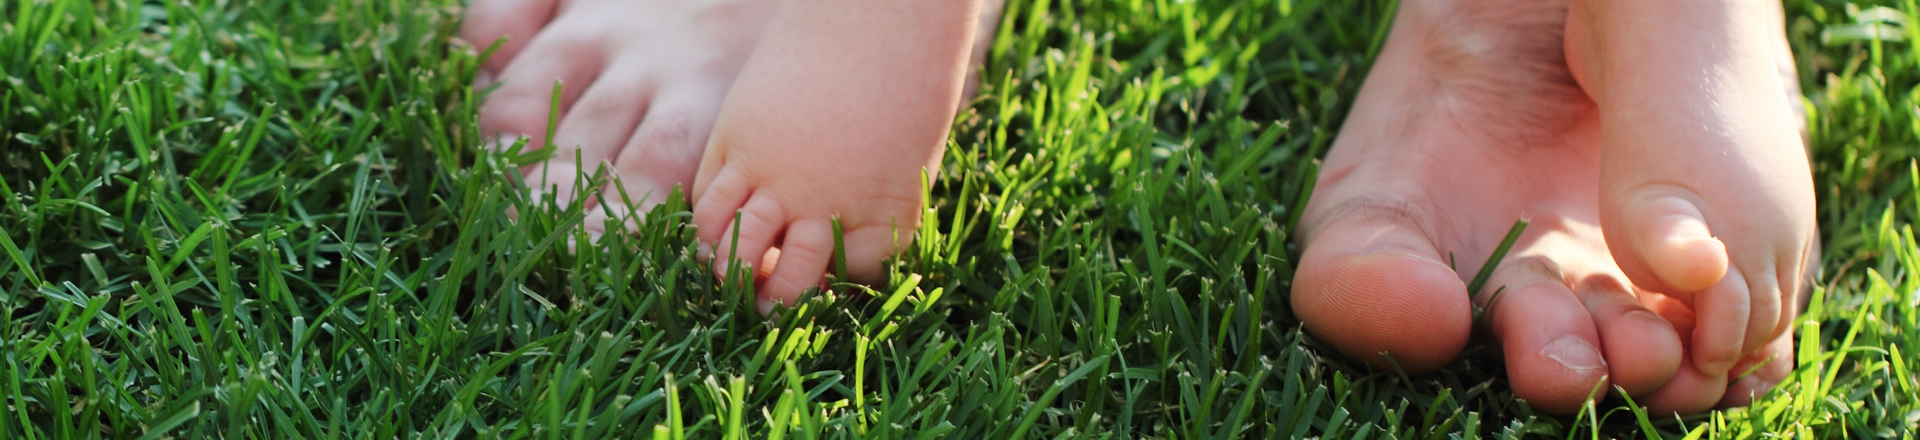 What is Earthing? Touching your bare feet to the Earth's surface... grass, sand, etc.